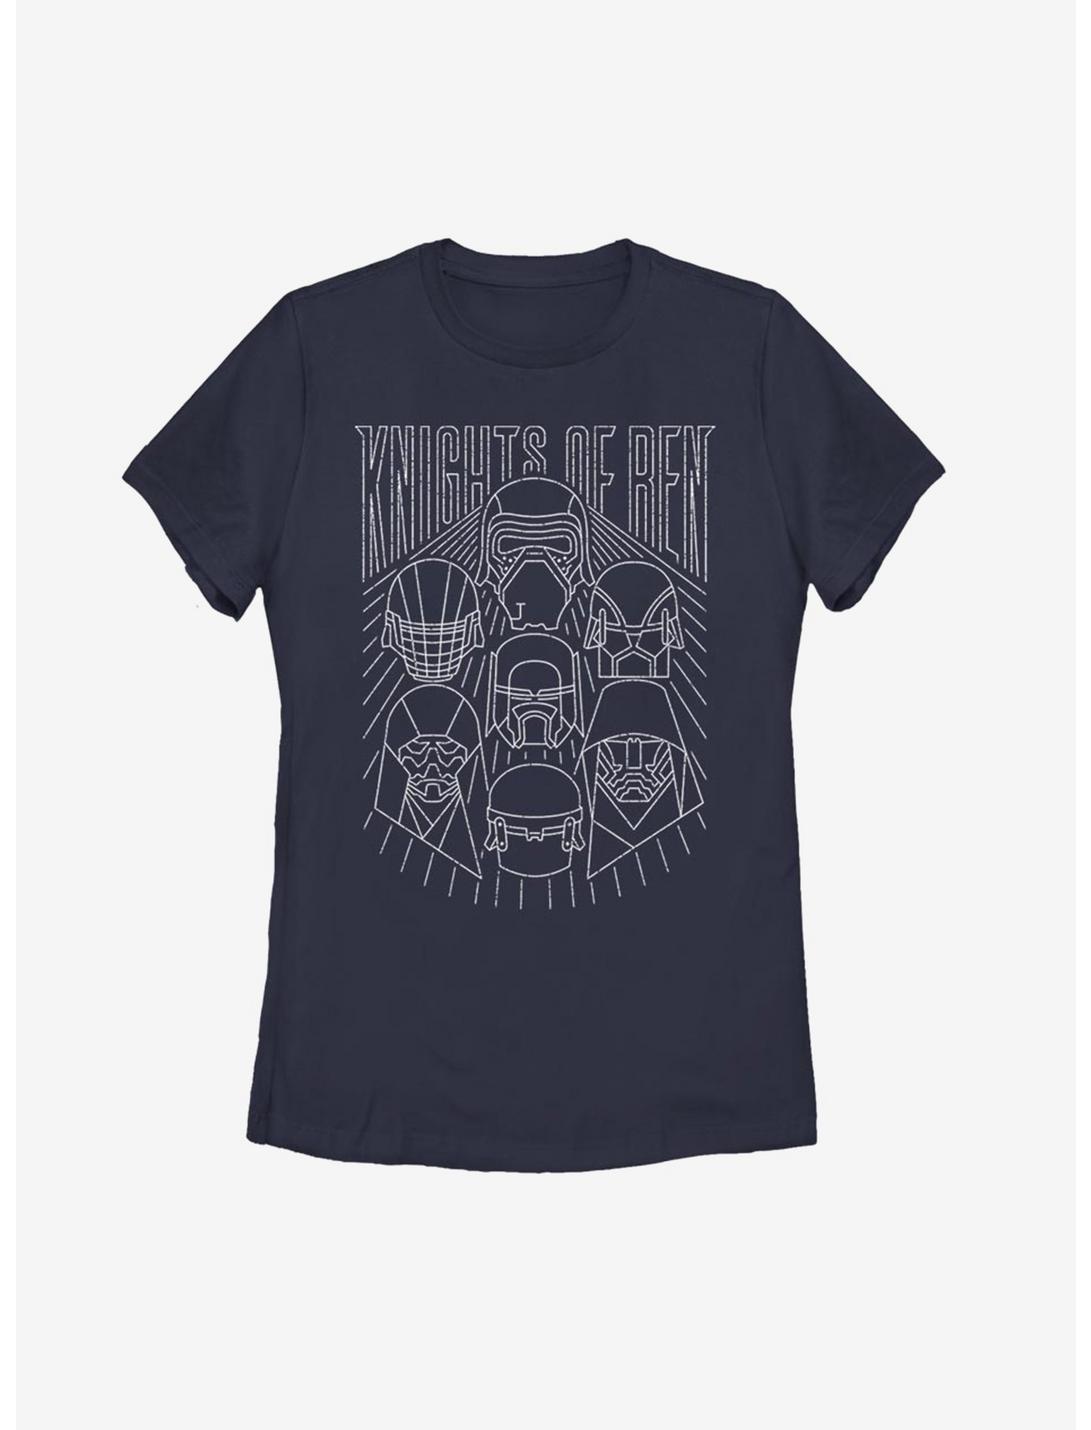 Star Wars Episode IX The Rise Of Skywalker Simple Outlines Womens T-Shirt, NAVY, hi-res